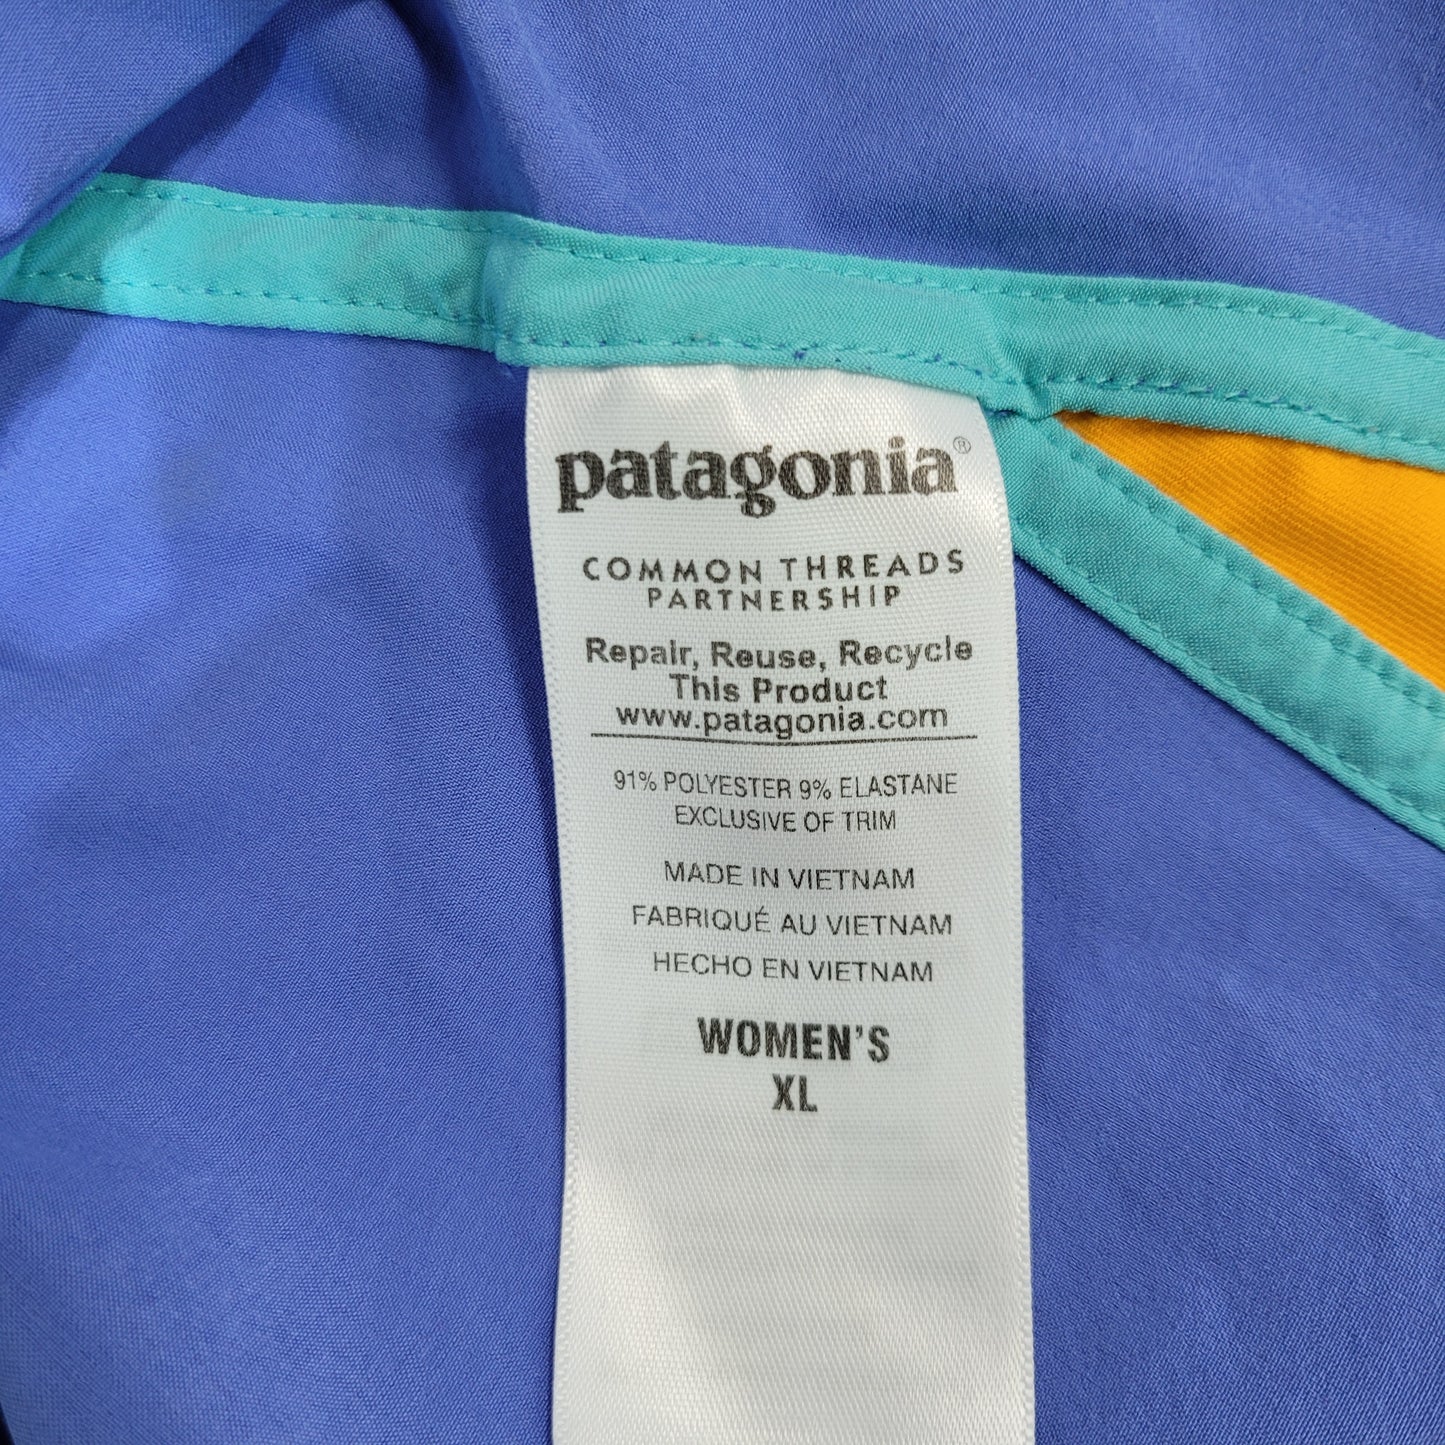 Patagonia Lined Active Shorts Yellow/Blue - XL